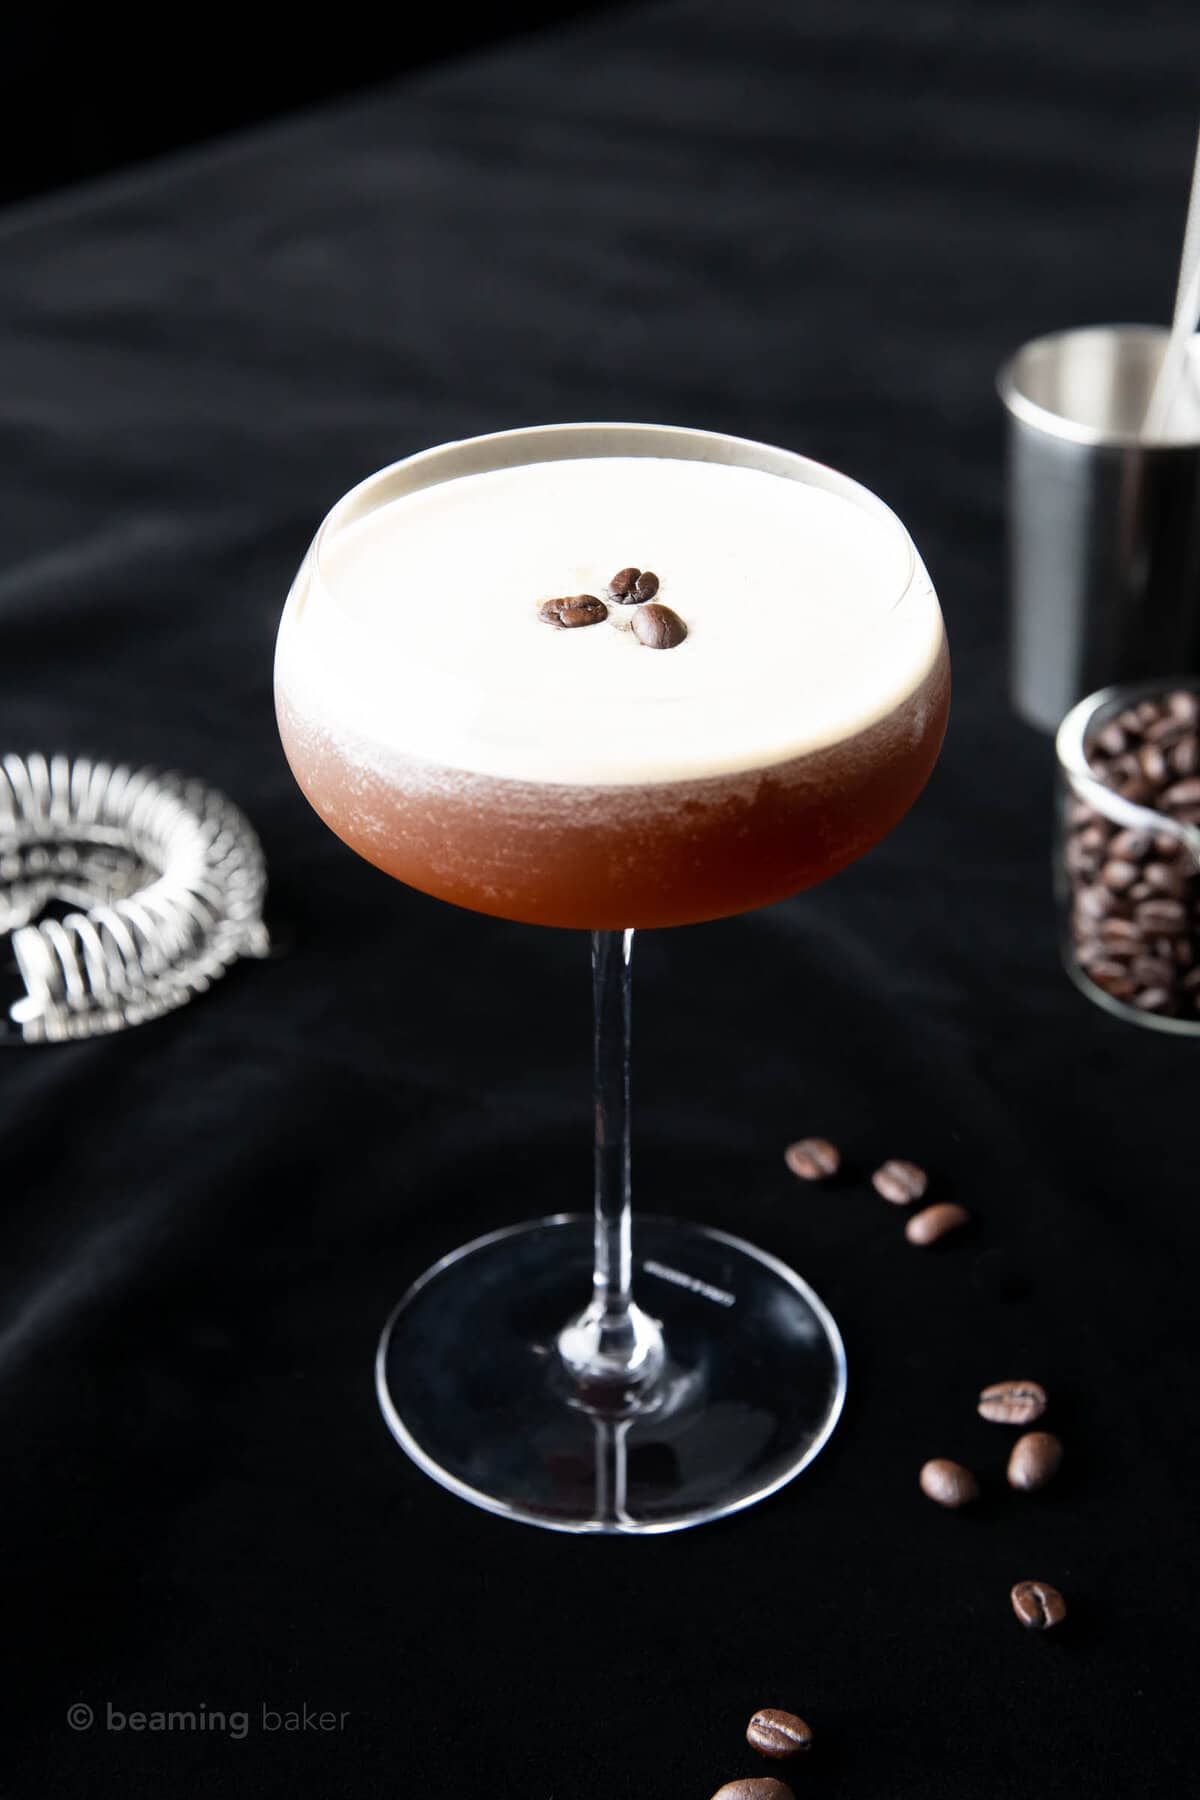 angled shot of coffee martini against a black backdrop